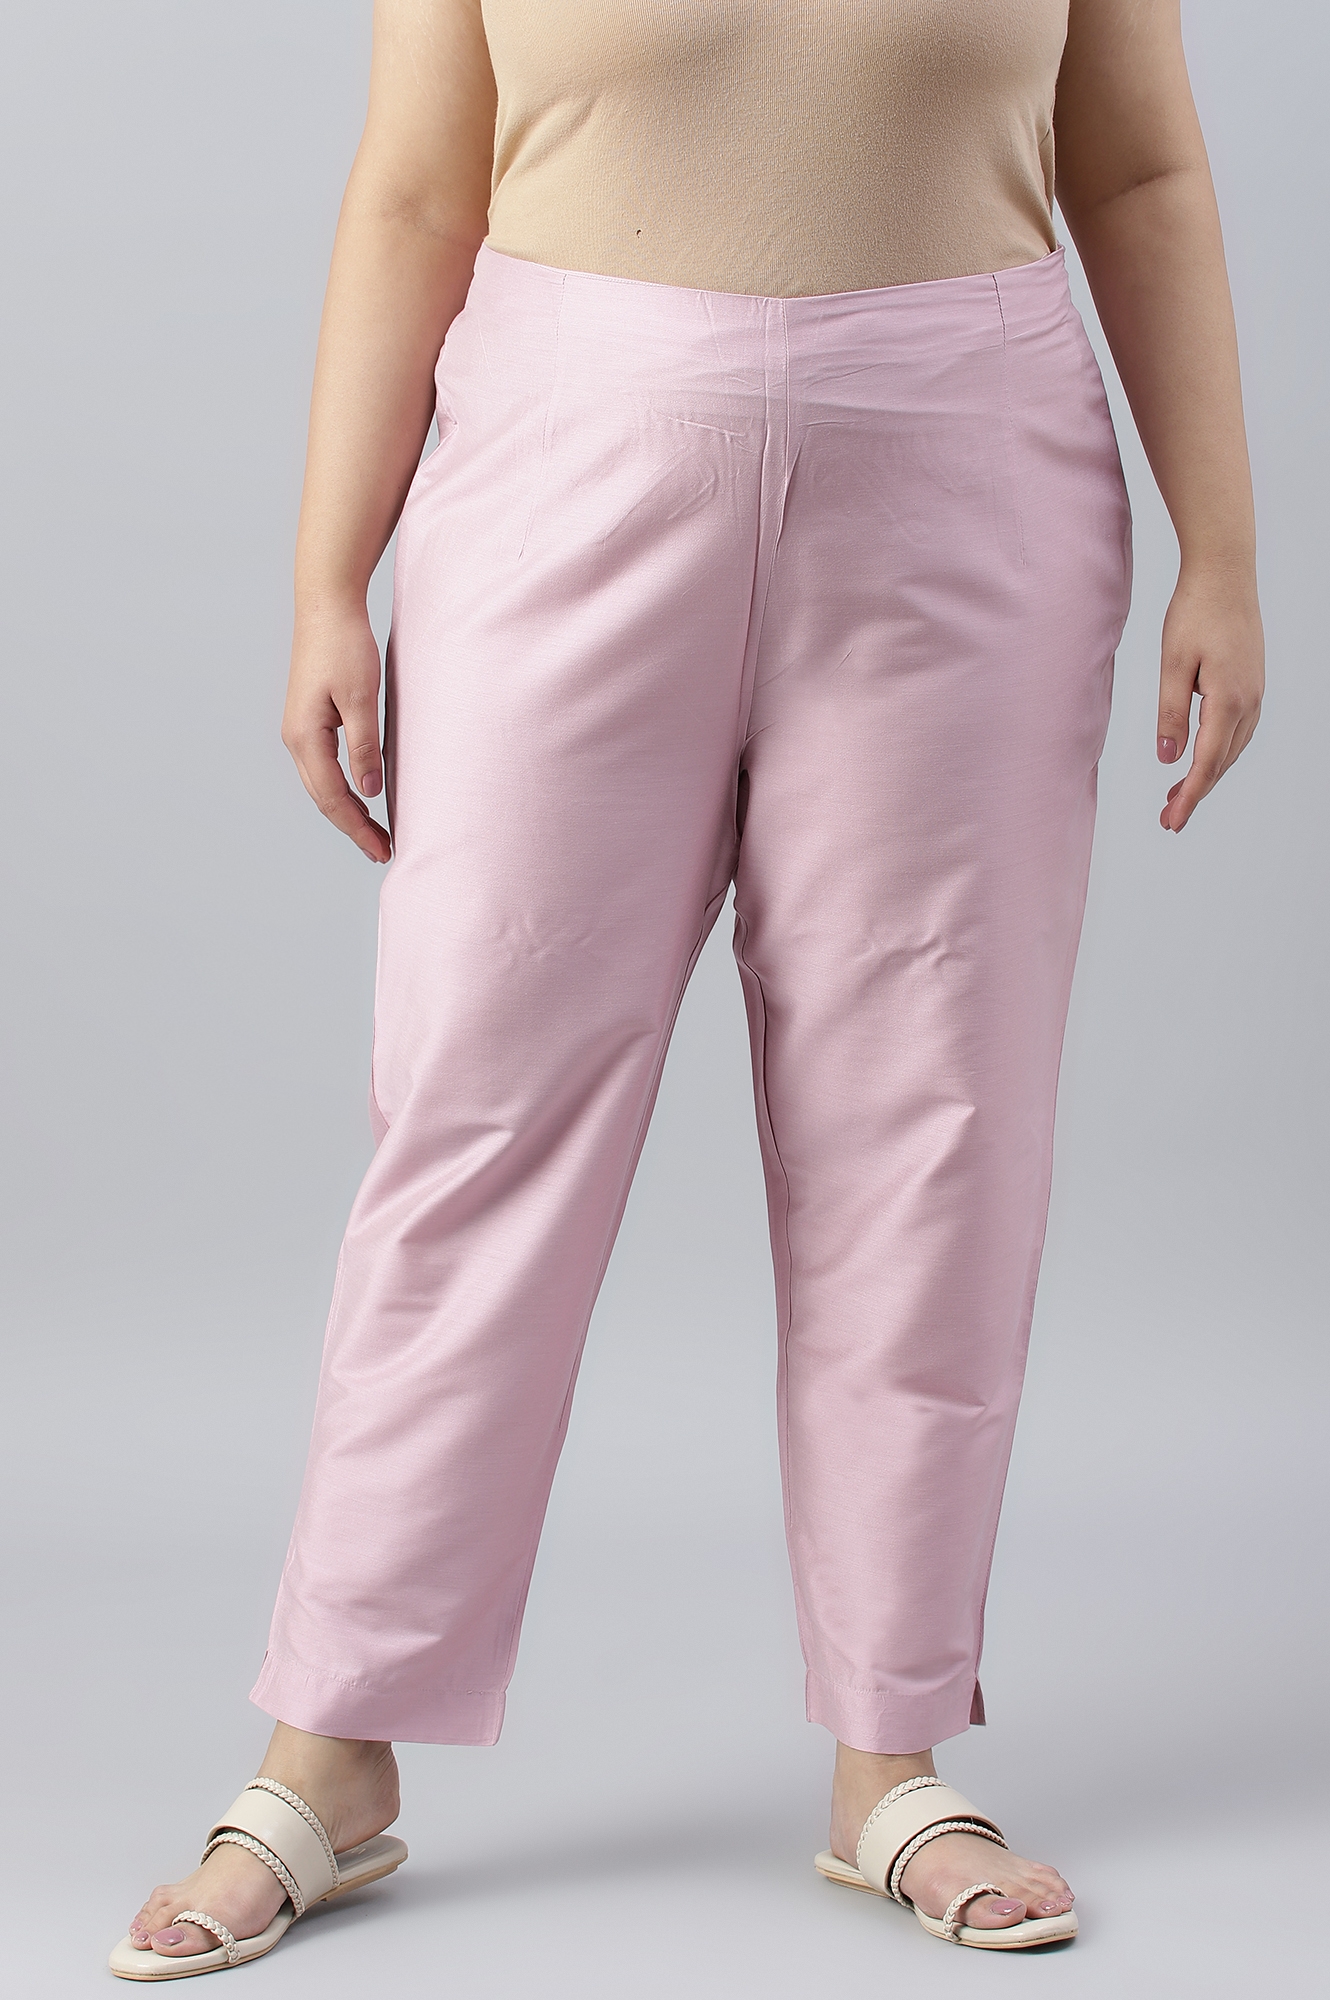 Women's Pink Viscose Rayon Solid Trousers